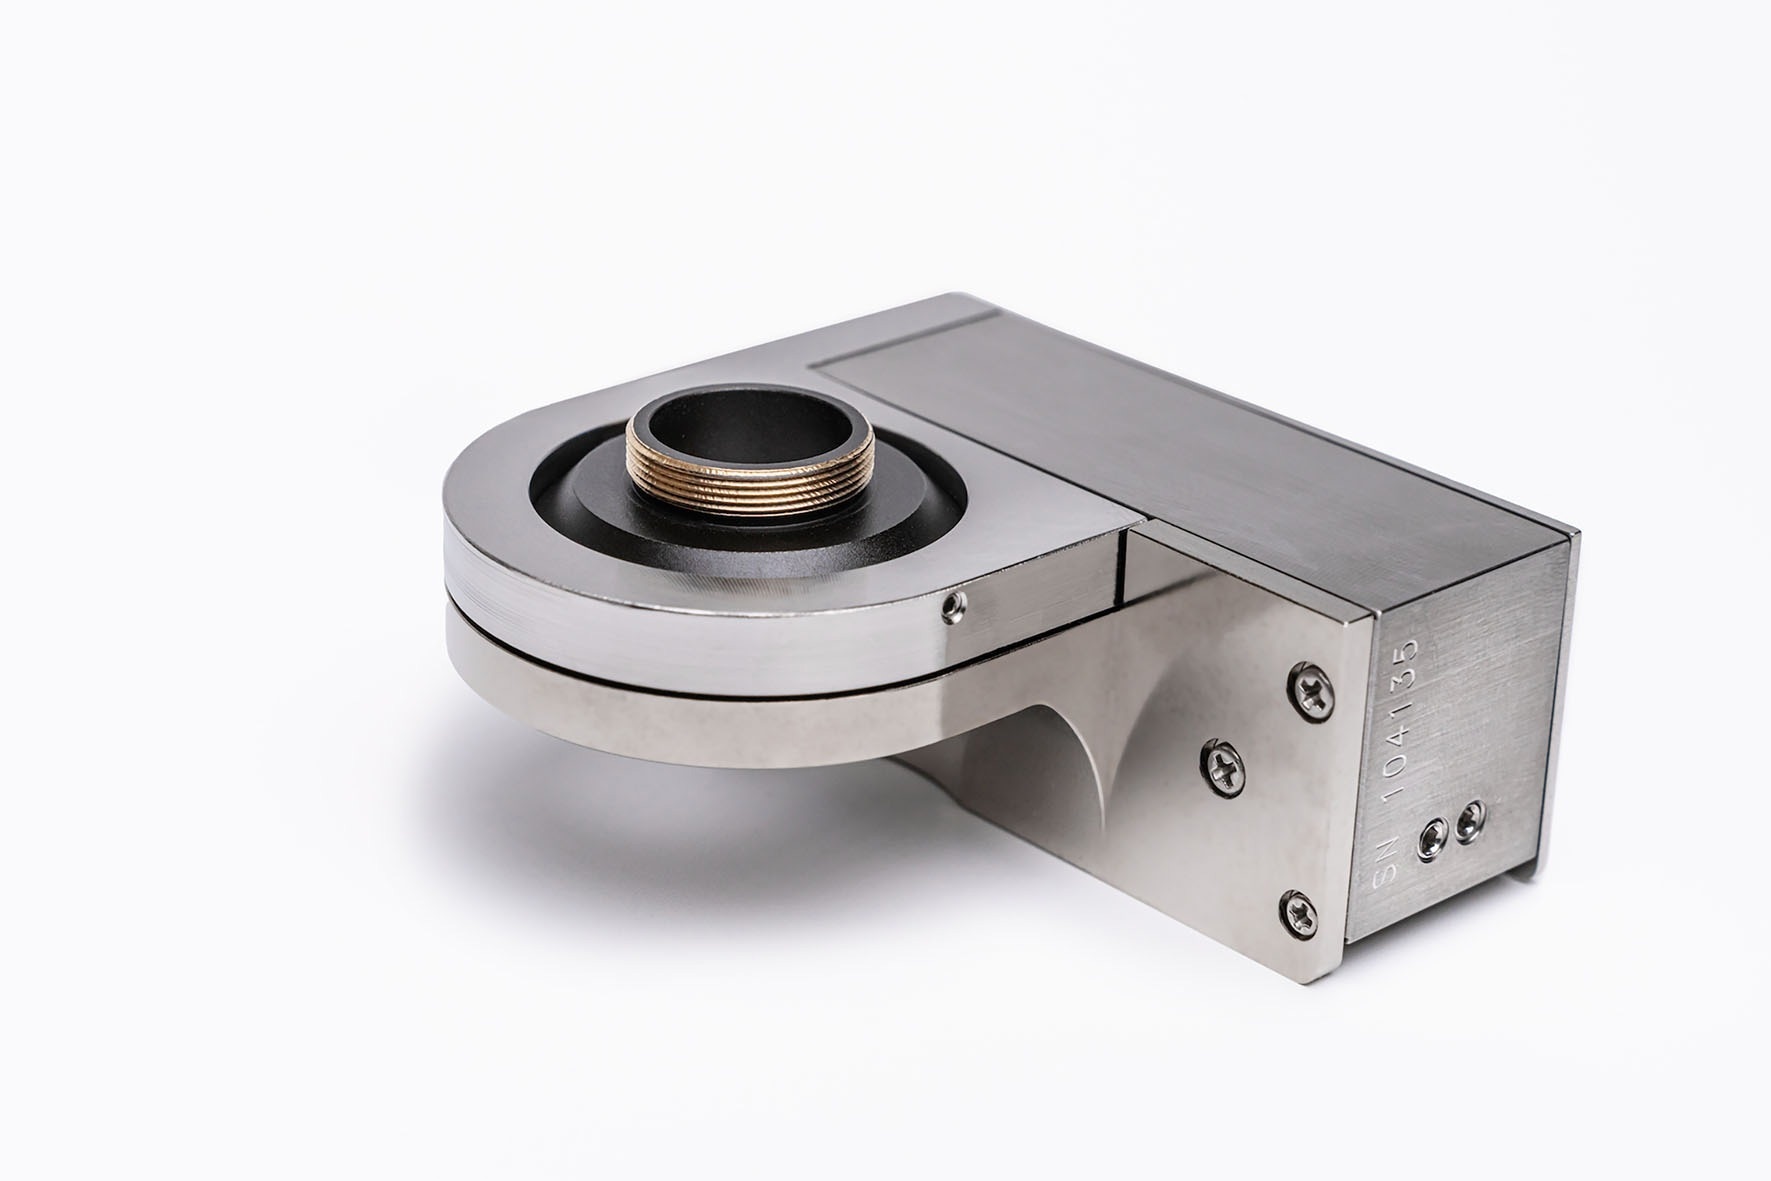 New Piezo Objective Scanner Offers Market Leading Accuracy And Resolution